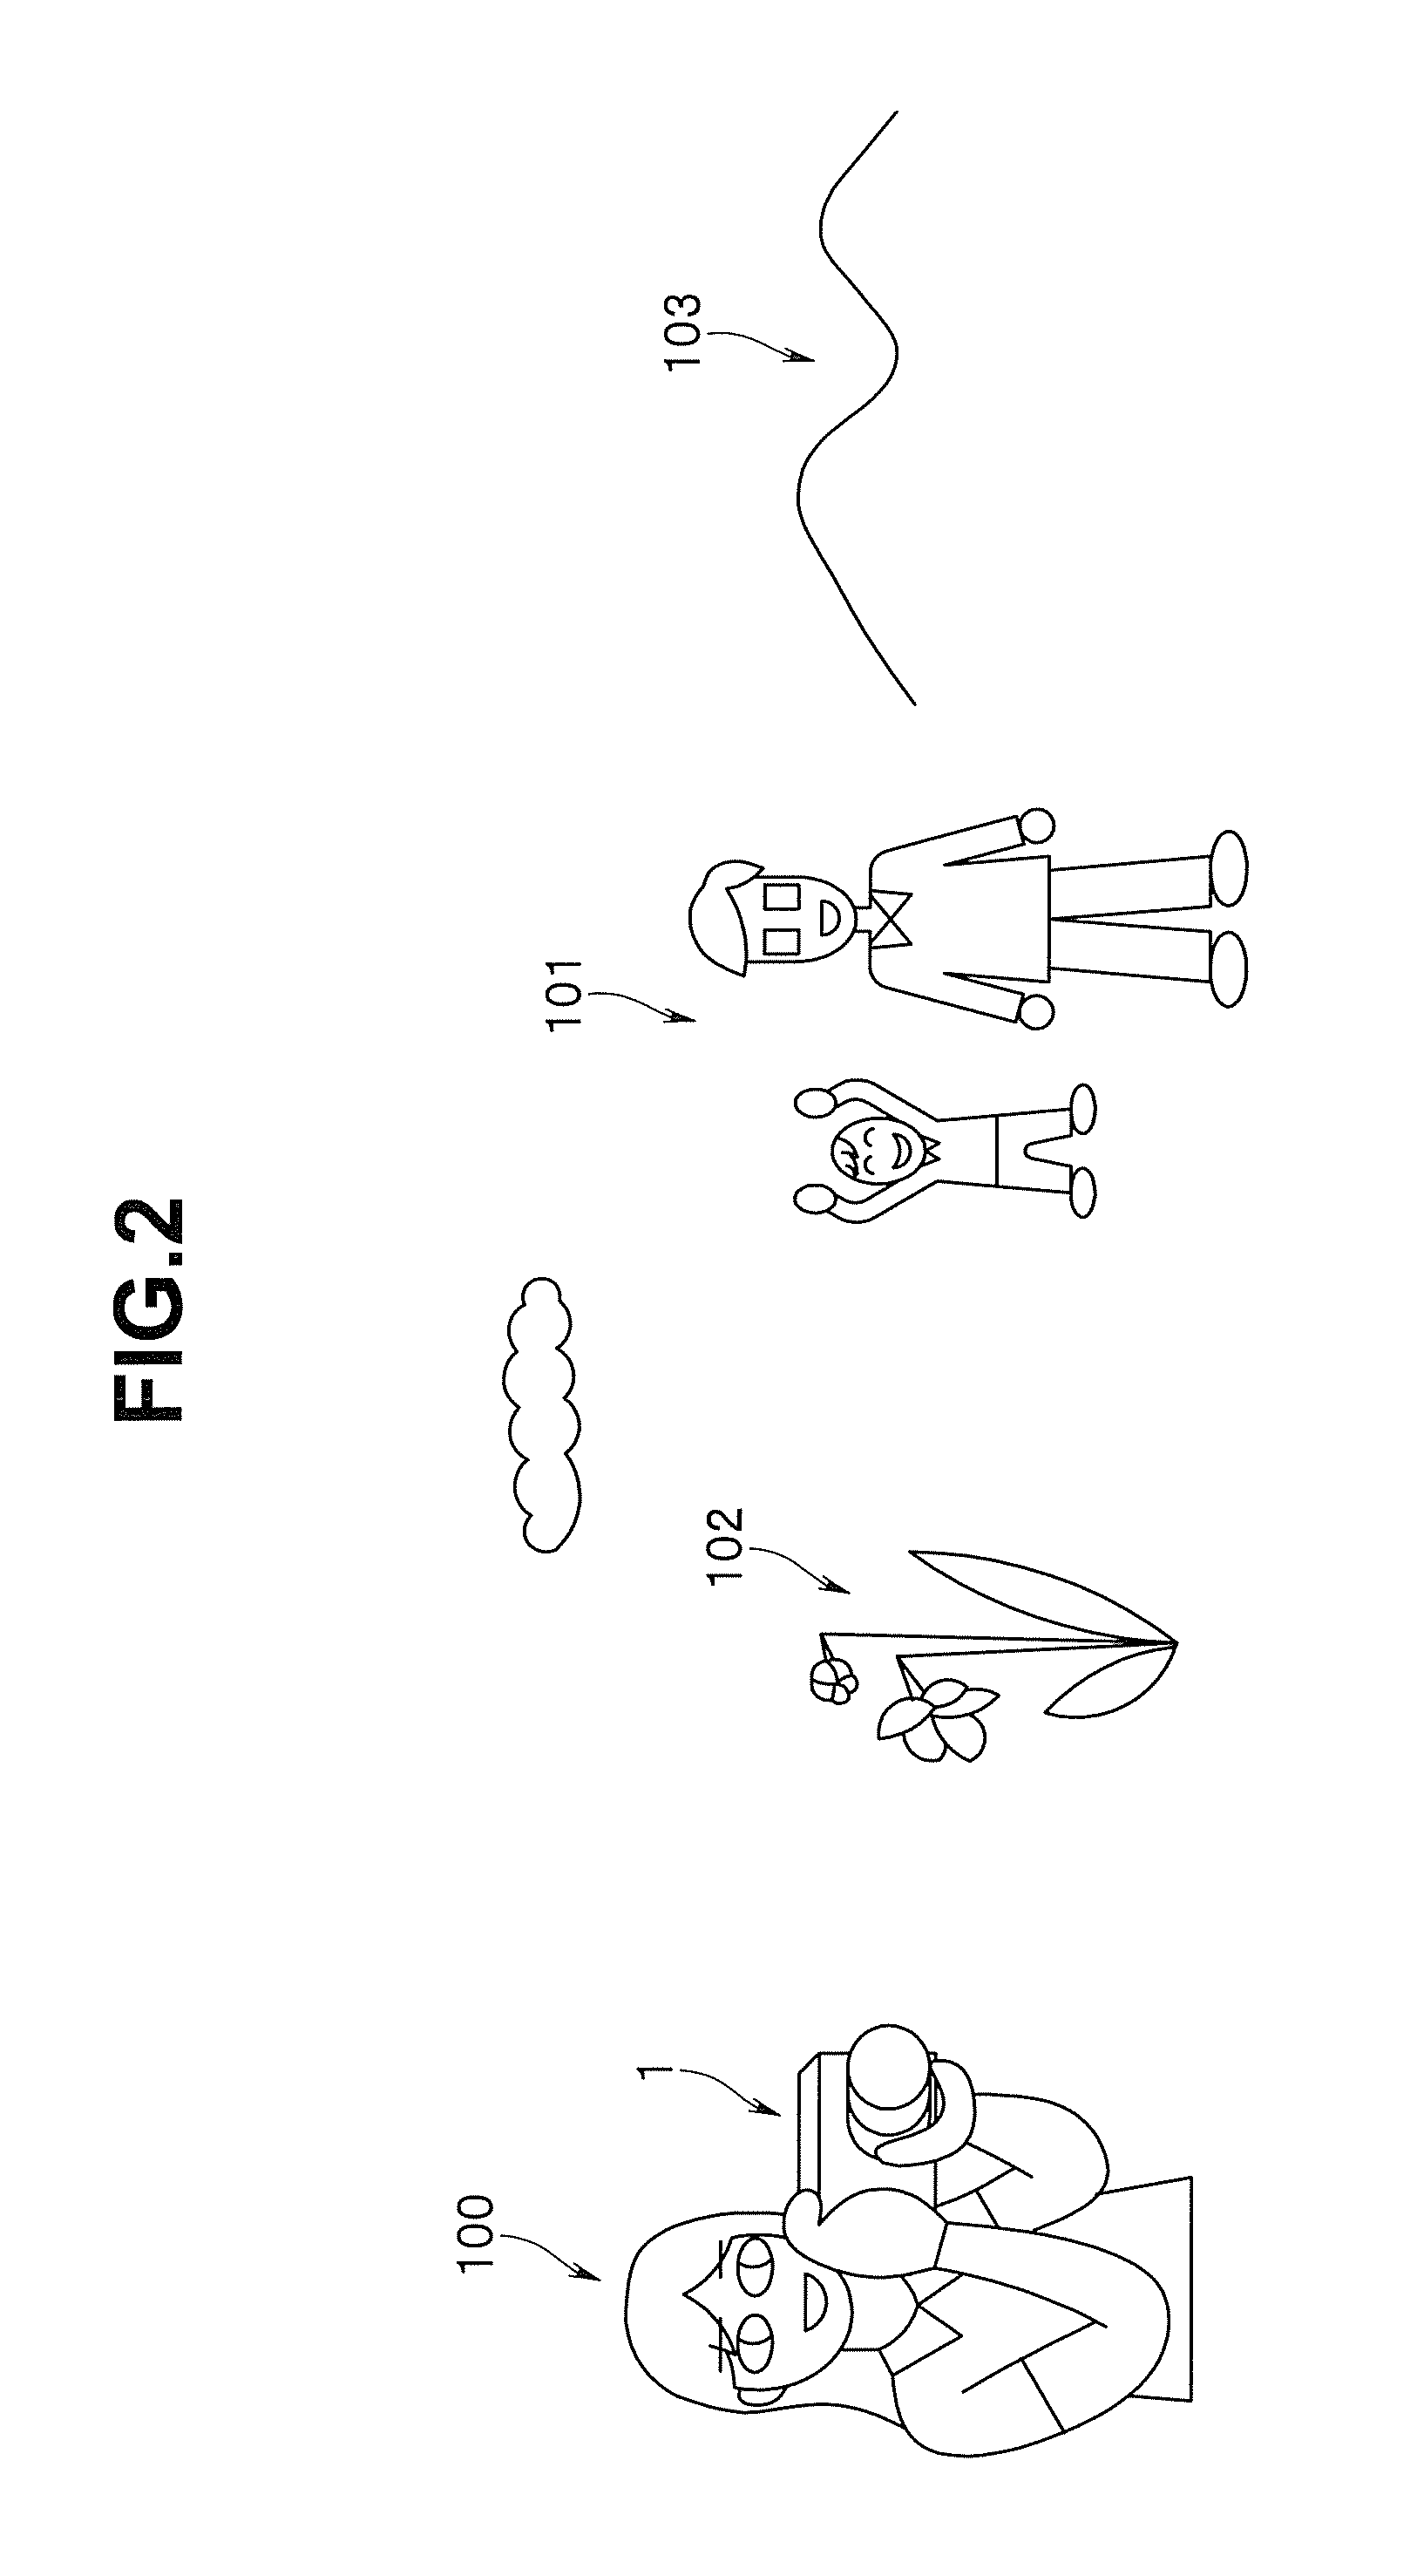 Image pickup apparatus, method of controlling image pickup apparatus, image pickup apparatus system, and image pickup control program stored in storage medium of image pickup apparatus